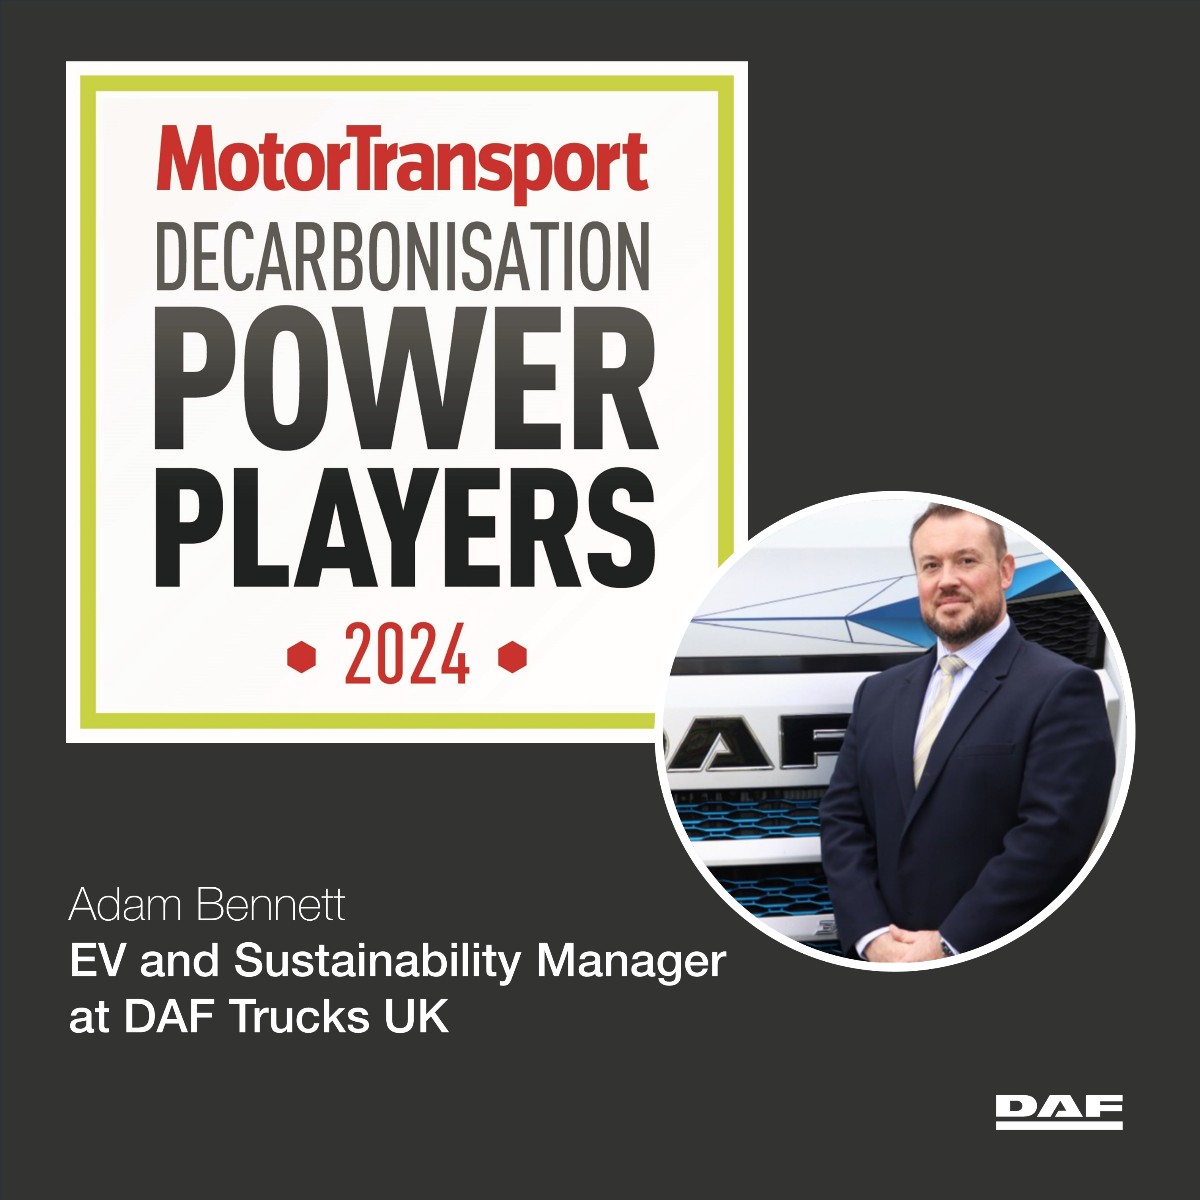 Congrats to Adam Bennett, our EV & Sustainability Manager, for making it onto the @MotorTransport 𝗧𝗼𝗽 𝟮𝟱 𝗗𝗲𝗰𝗮𝗿𝗯𝗼𝗻𝗶𝘀𝗮𝘁𝗶𝗼𝗻 𝗣𝗼𝘄𝗲𝗿 𝗣𝗹𝗮𝘆𝗲𝗿𝘀 𝟮𝟬𝟮𝟰 list, in recognition of his status as an industry trailblazer. 🏆
 
#Decarbonisation #NetZero #DAFTrucks